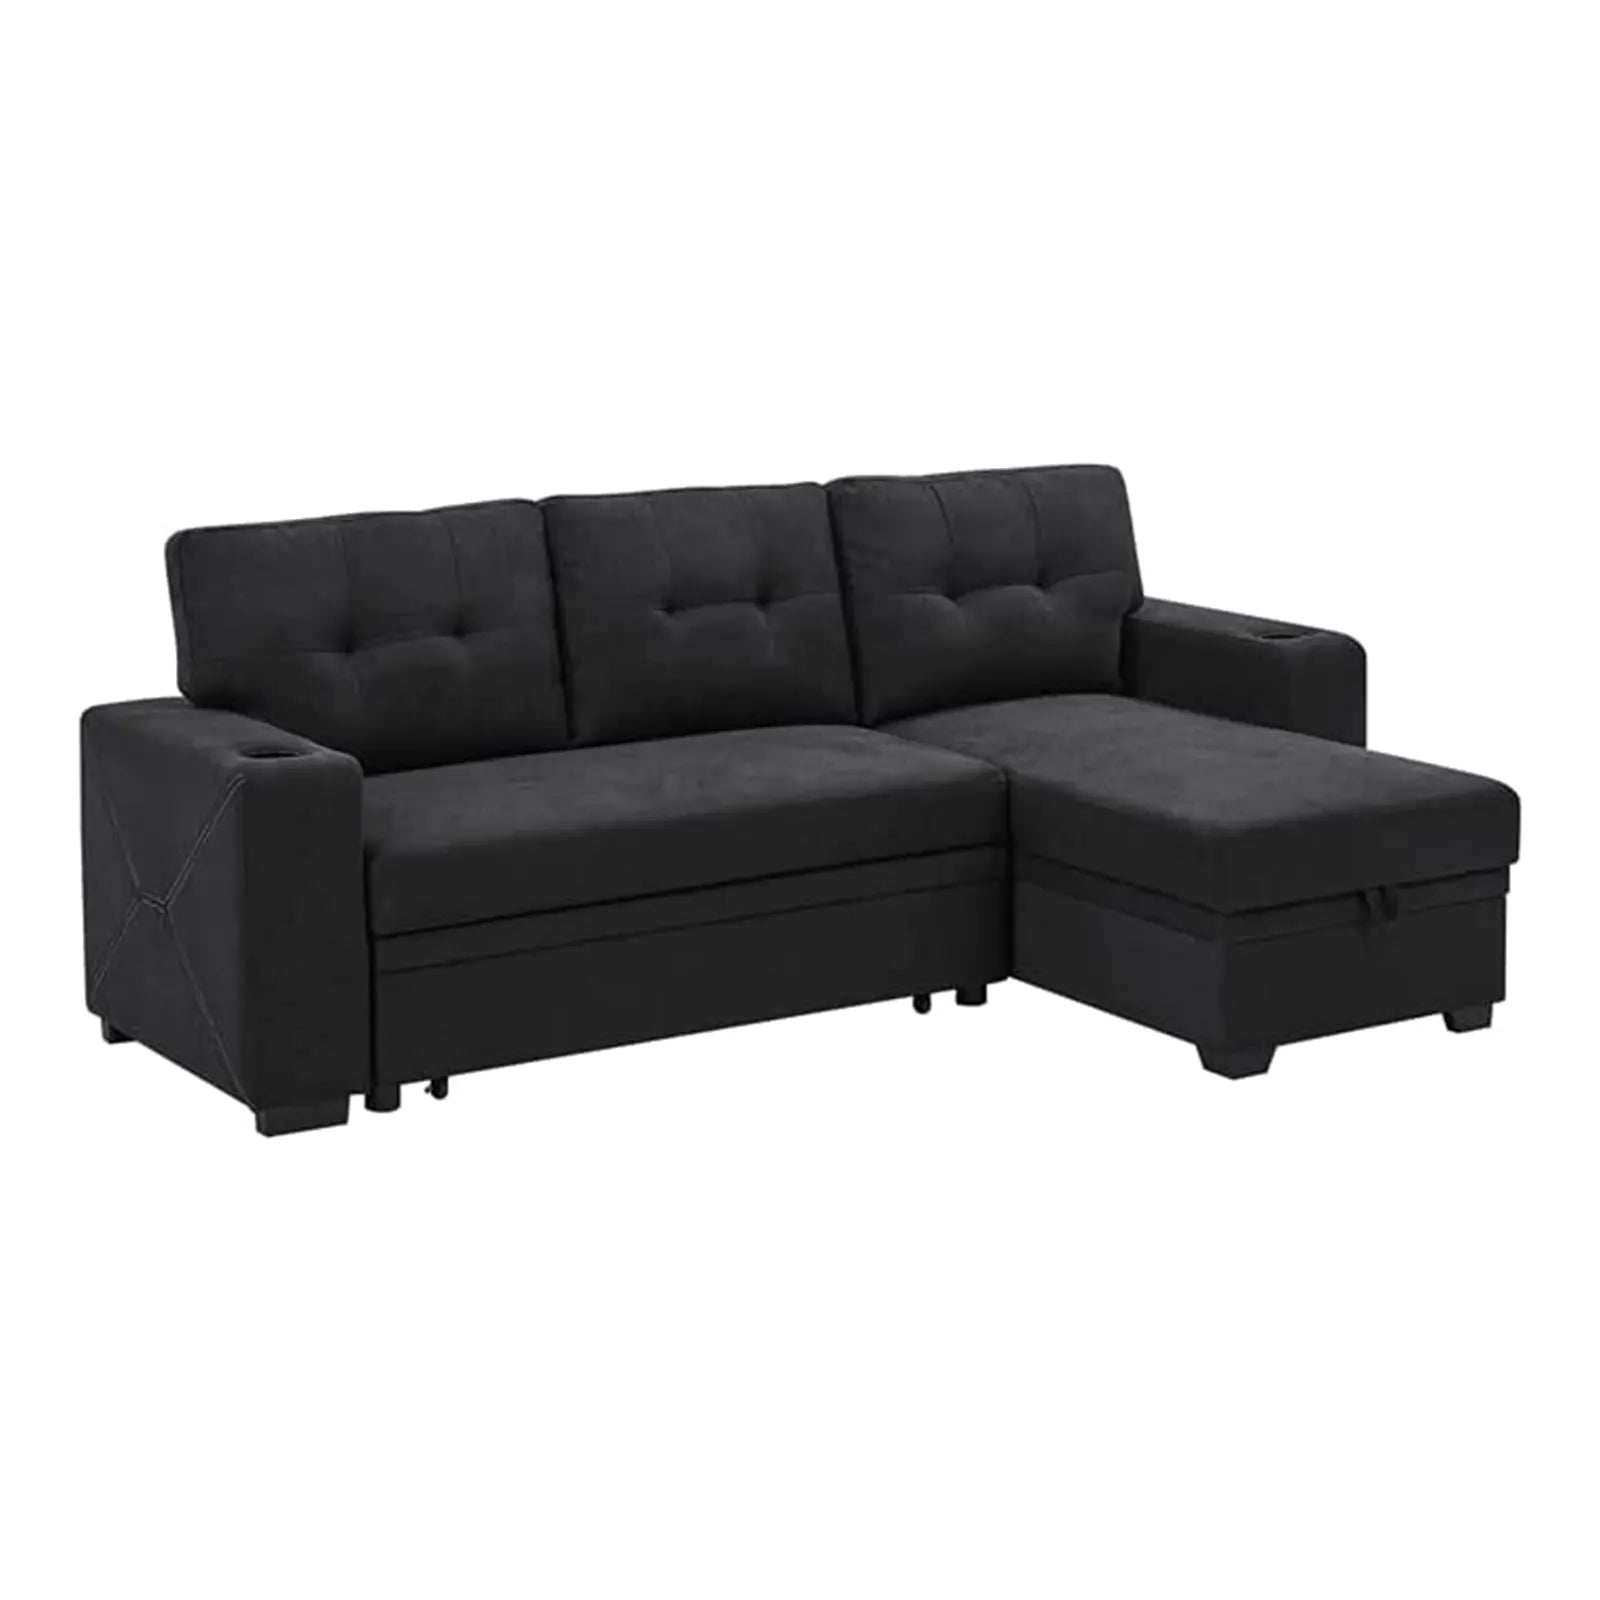 Upholstery Fabric Convertible Sectional Sleeper Sofa with Cup Holders